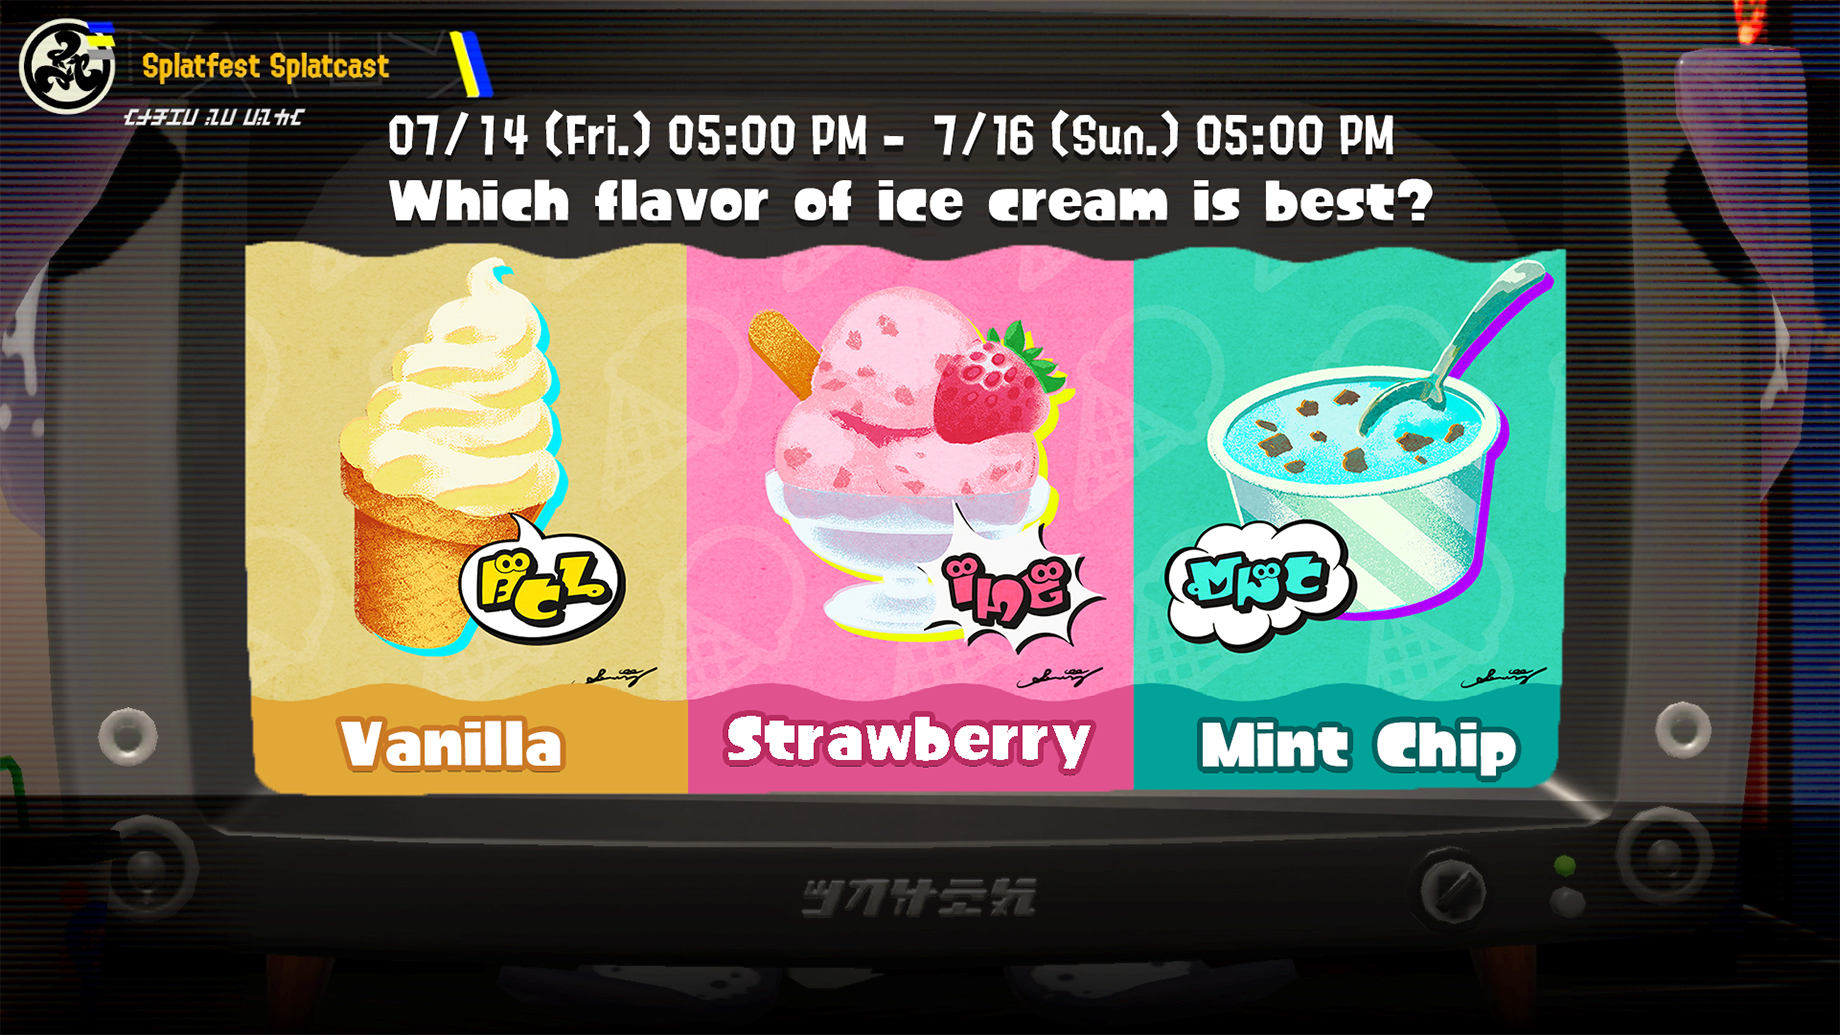 Which flavor of ice cream is best? Vanilla, Strawberry, or Mint Chip?